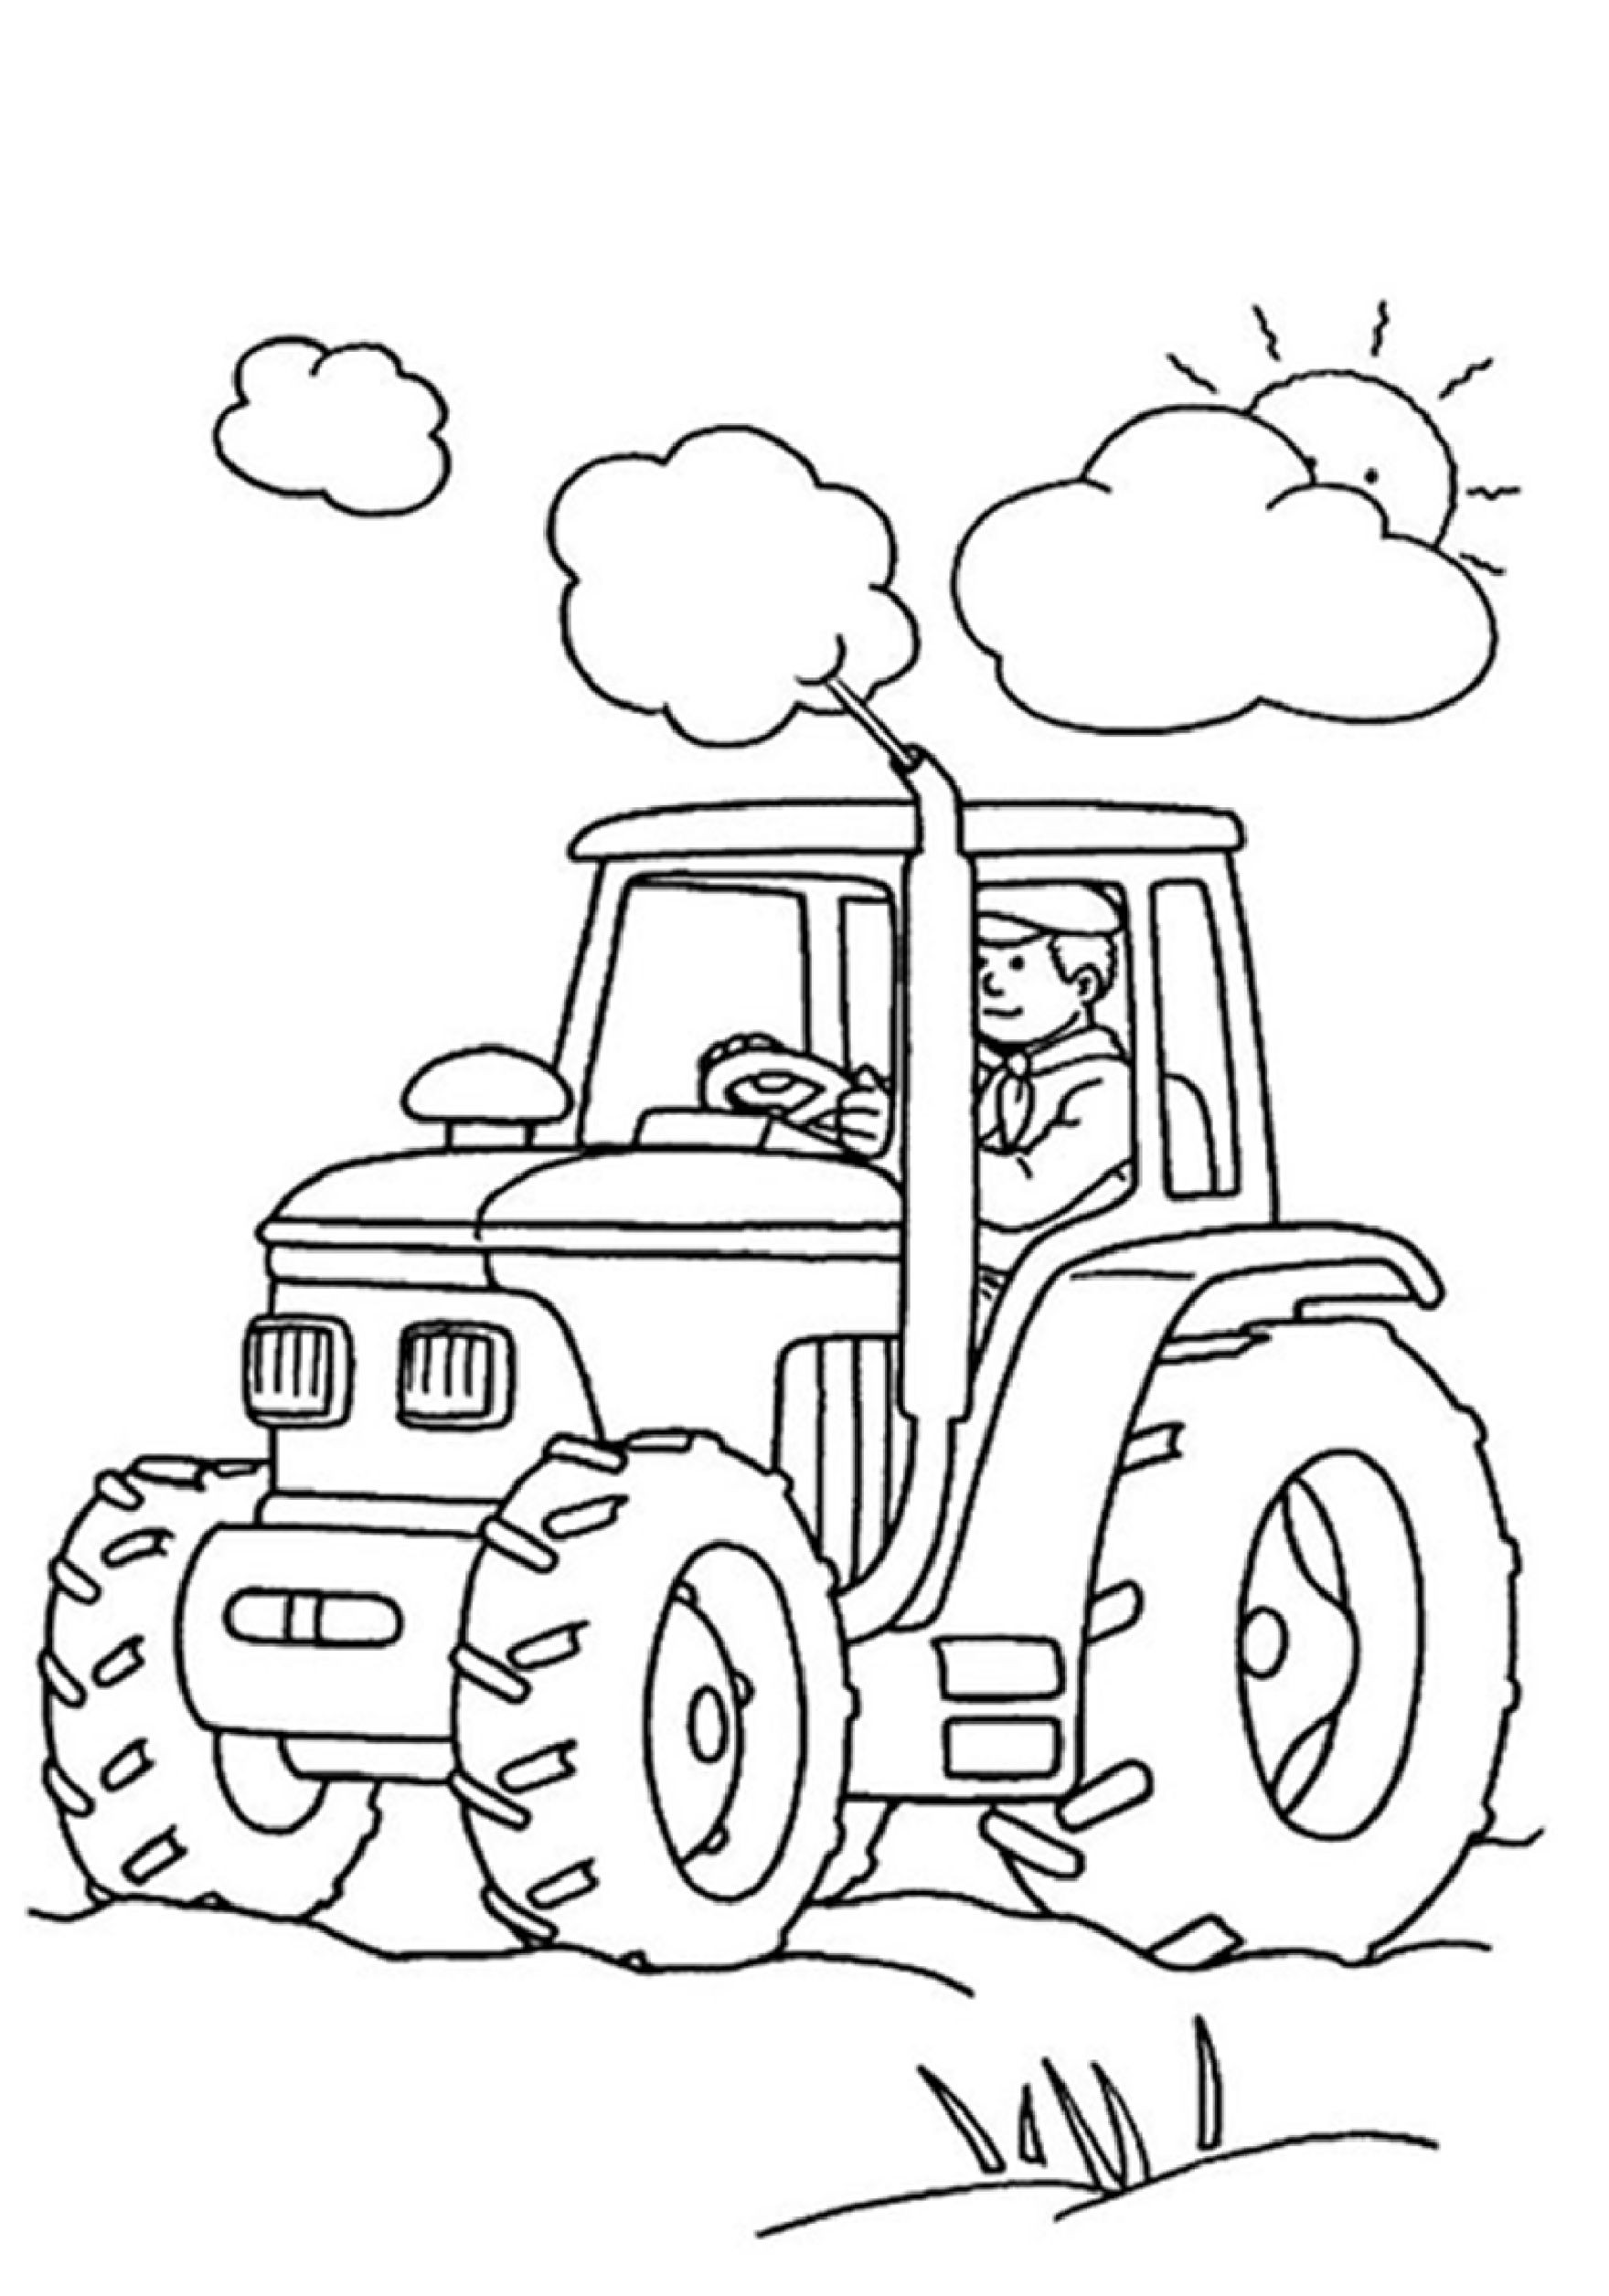 Printable Coloring Pages For Kids.Pdf
 Knowledge Free Printable Coloring Pages For Kids Resume